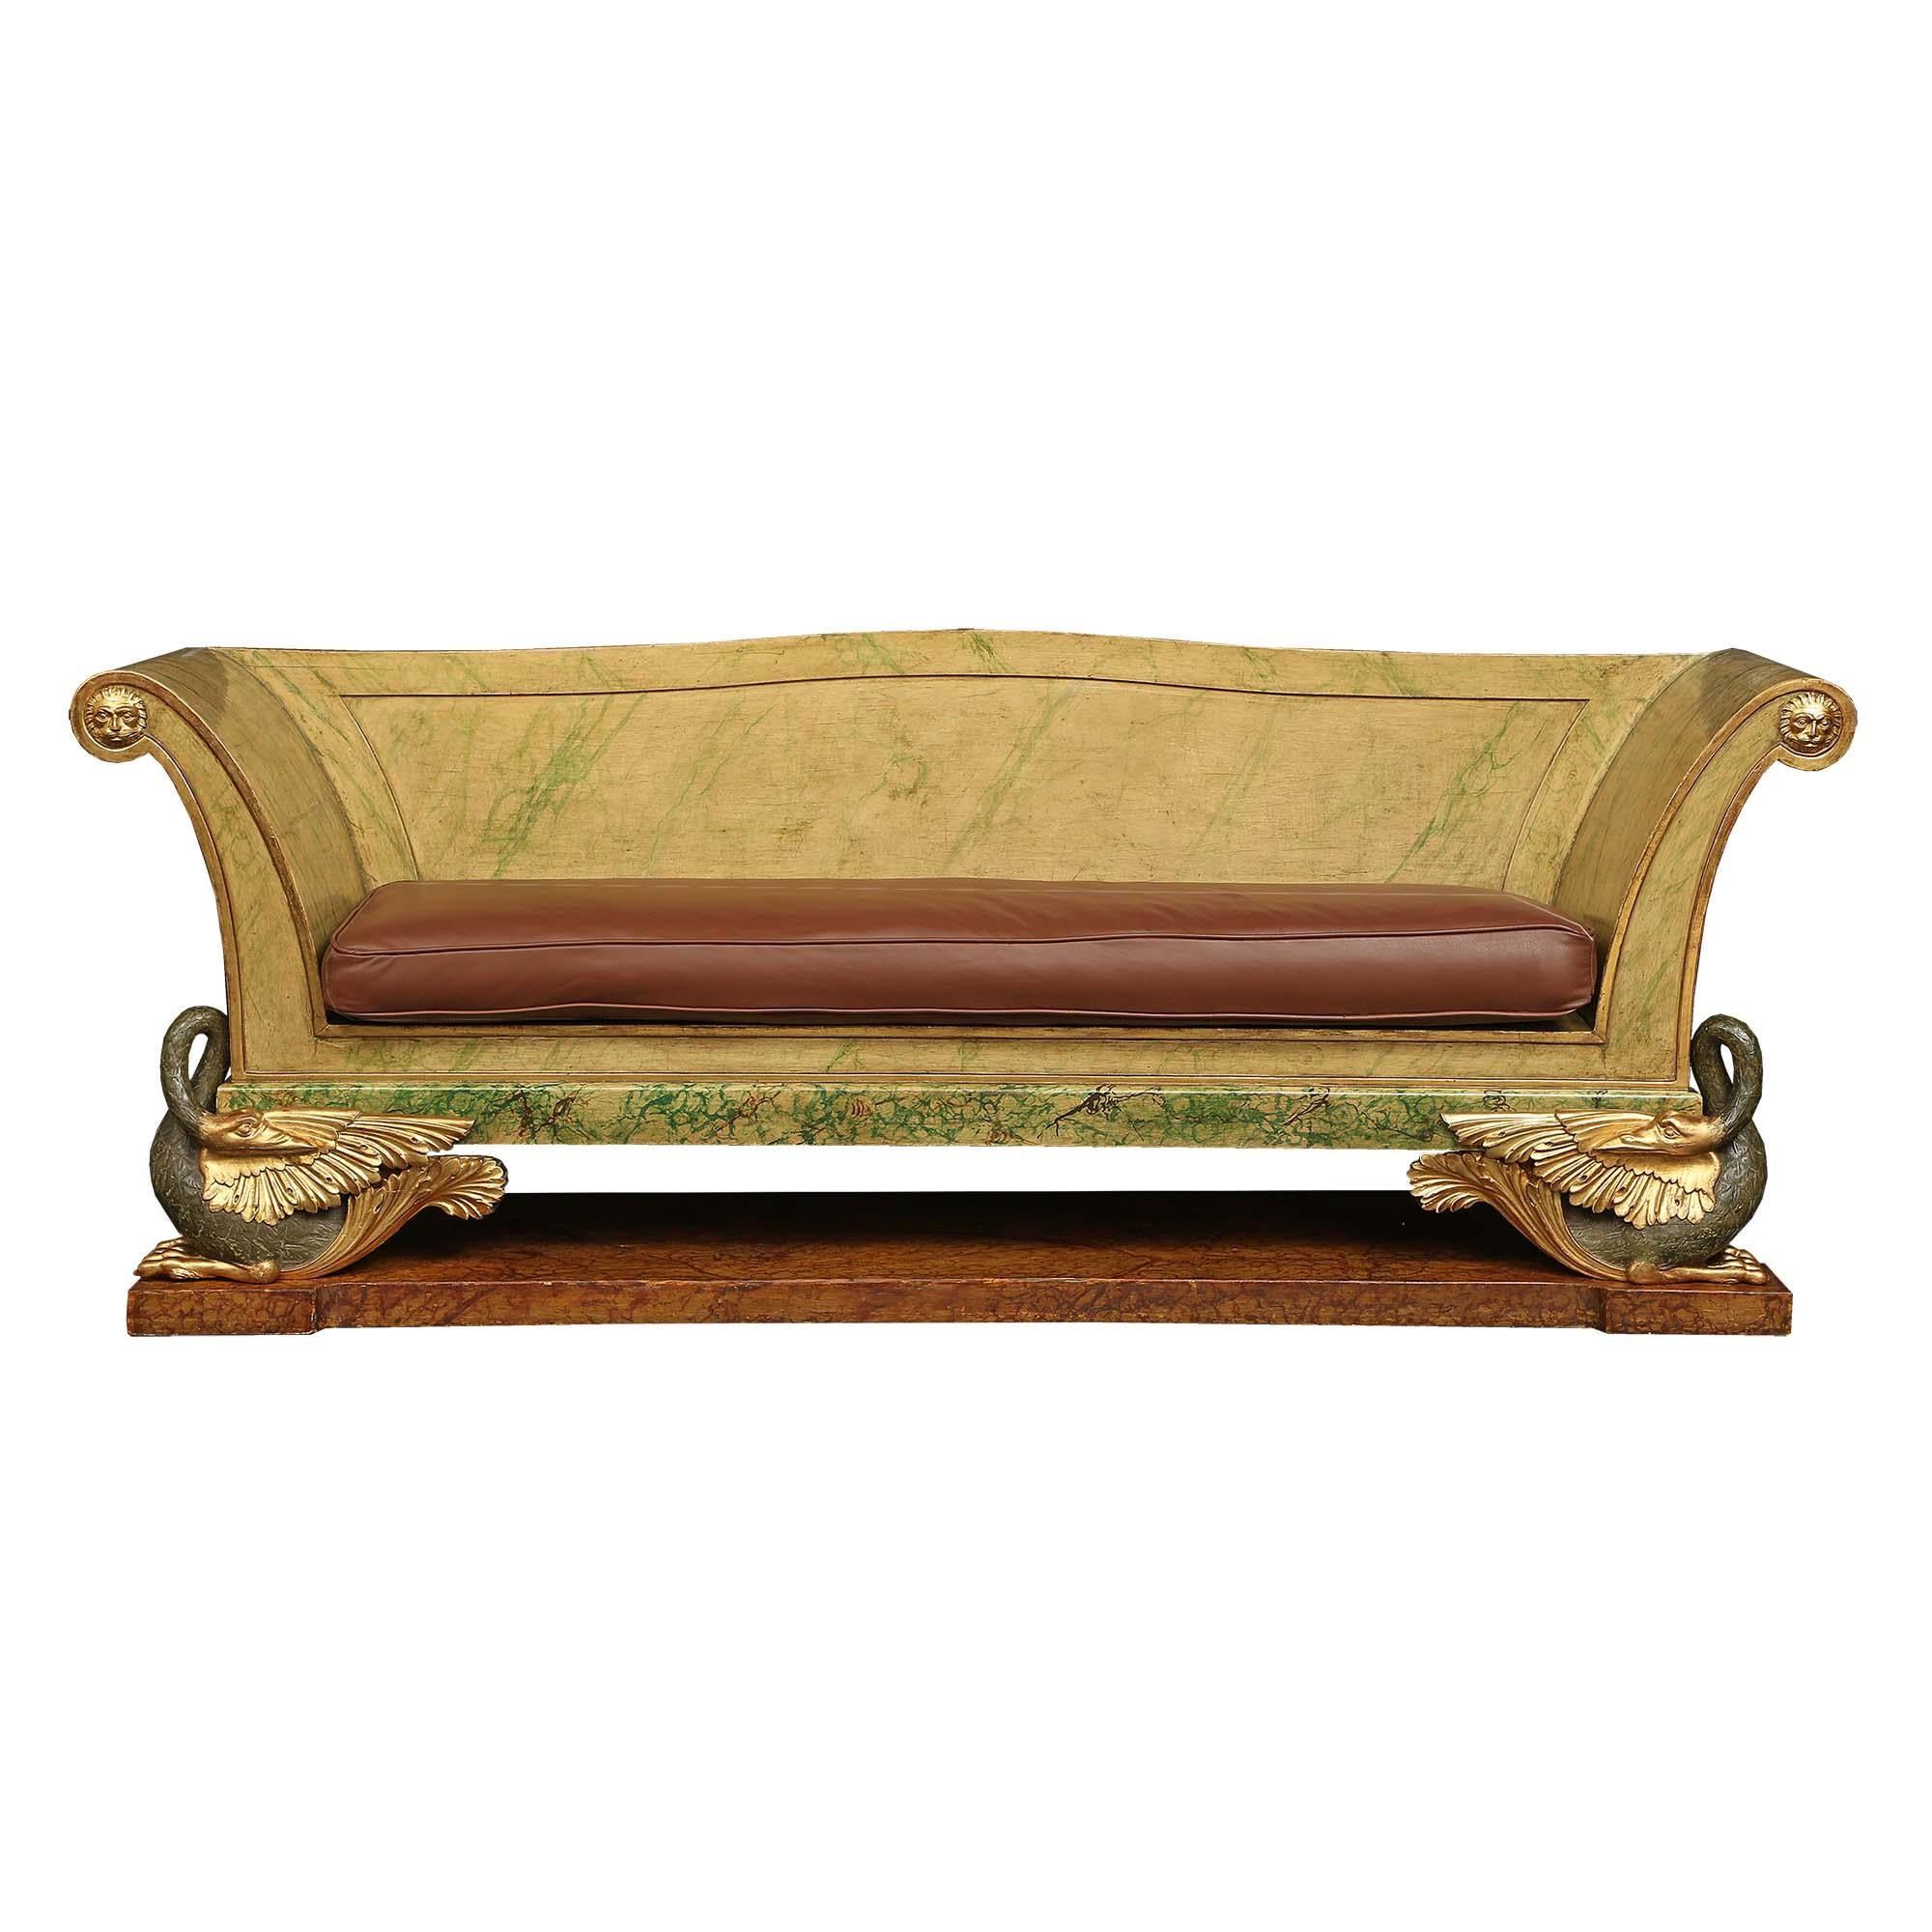 Italian Early 19th Century Neo-Classical St. Settee